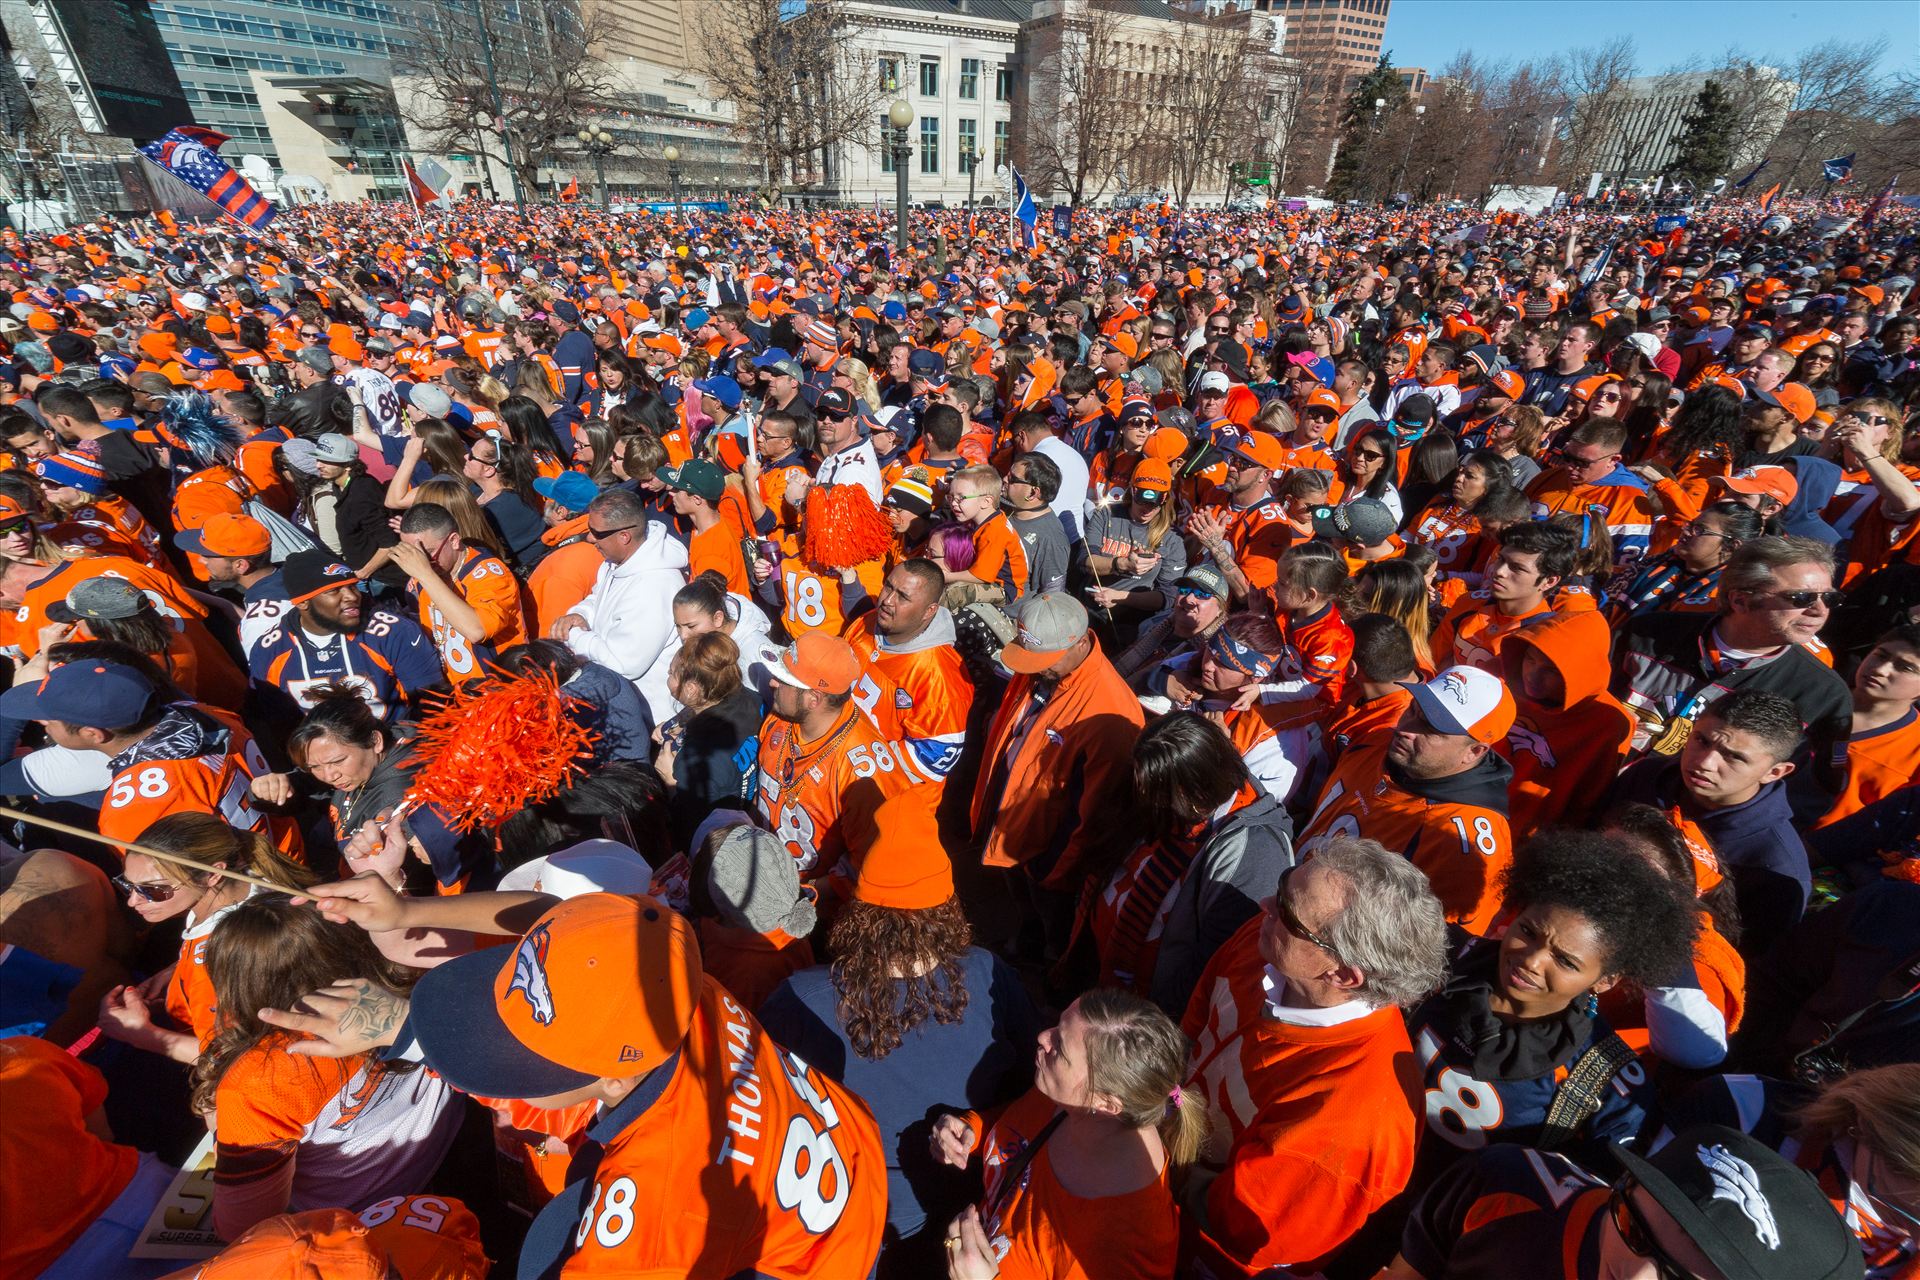 Broncos Fans 1 The best fans in the world descend on Civic Center Park in Denver Colorado for the Broncos Superbowl victory celebration. by Scott Smith Photos